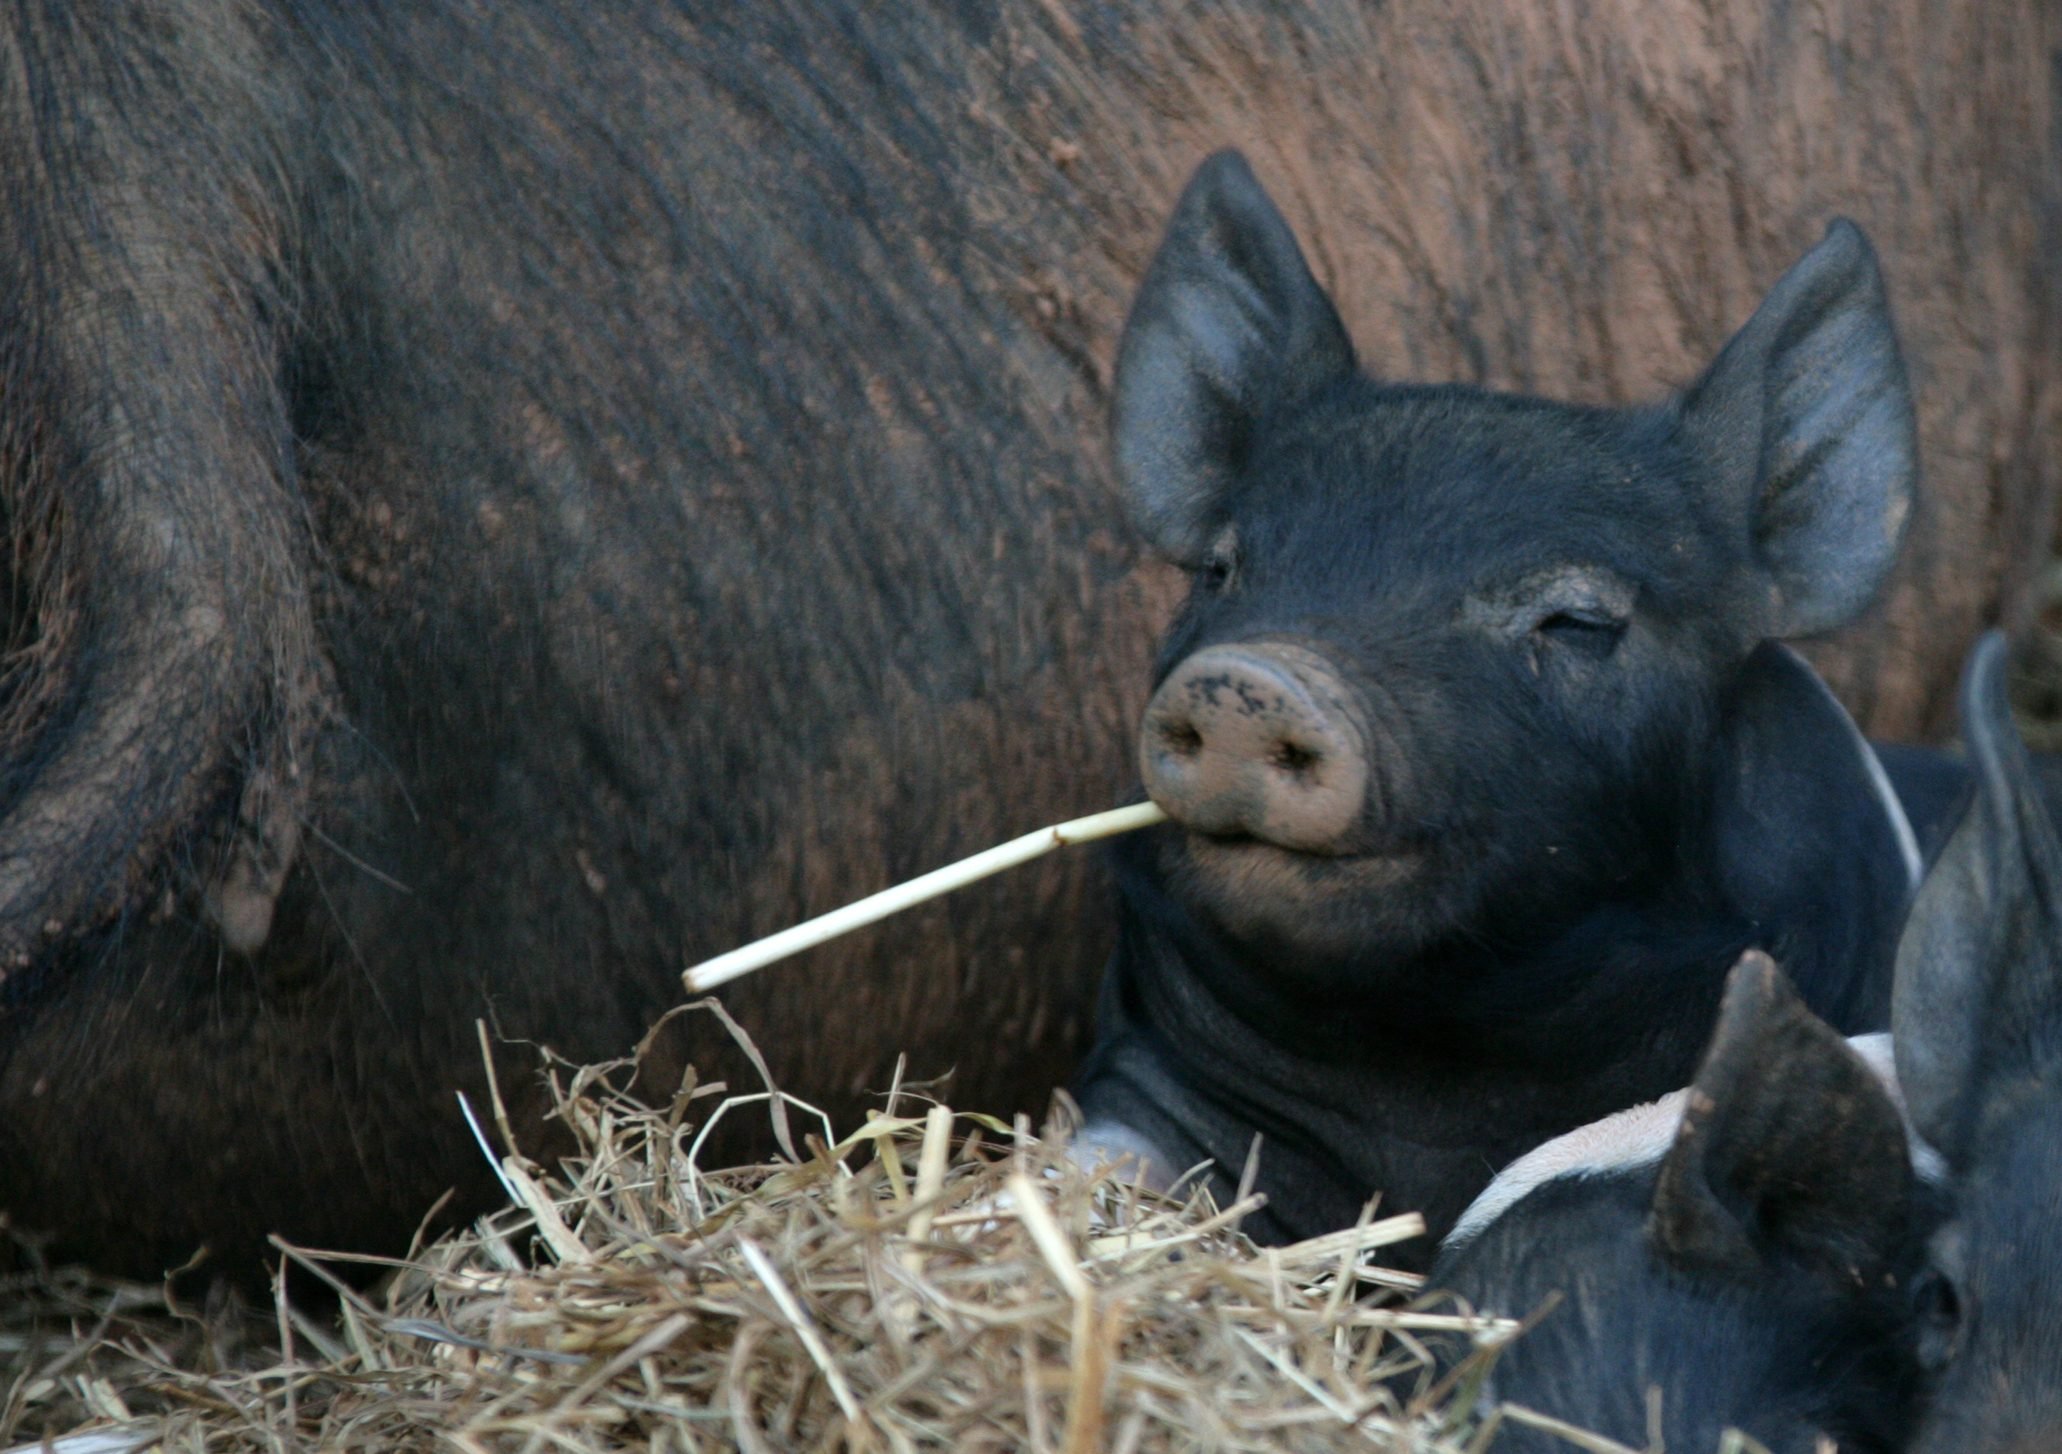 baby pig with a piece of straw sticking out of his mouth